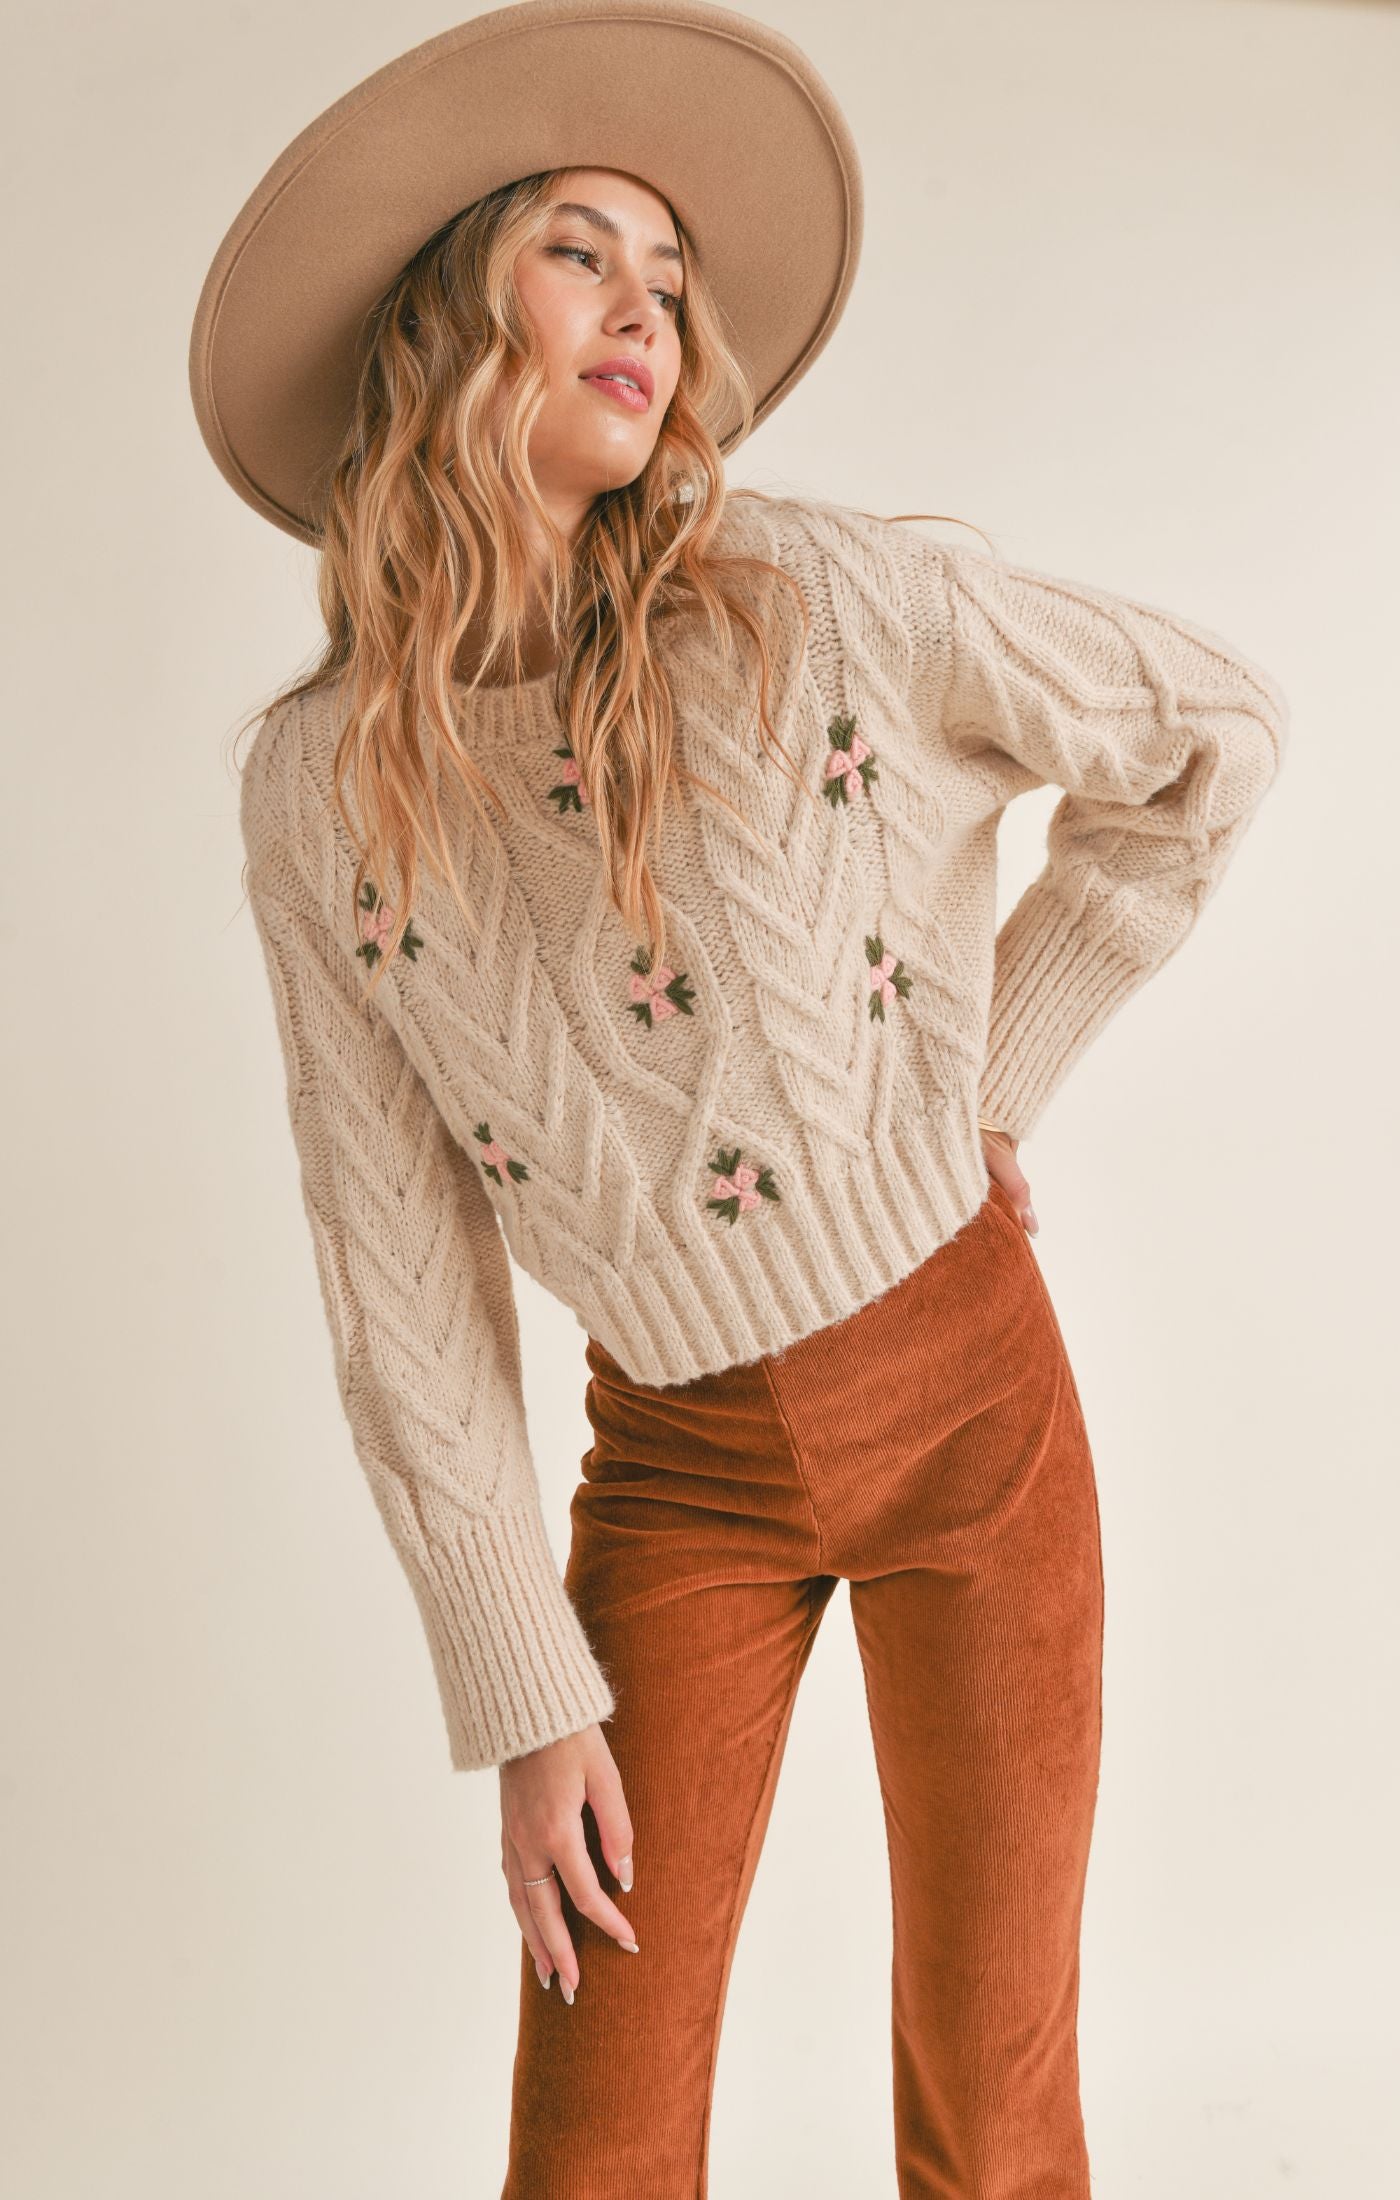 BLOOM OF YOUTH KNIT EMROIDERED SWEATER-cream,cable knit,floral pattern,long sleeve,round neck